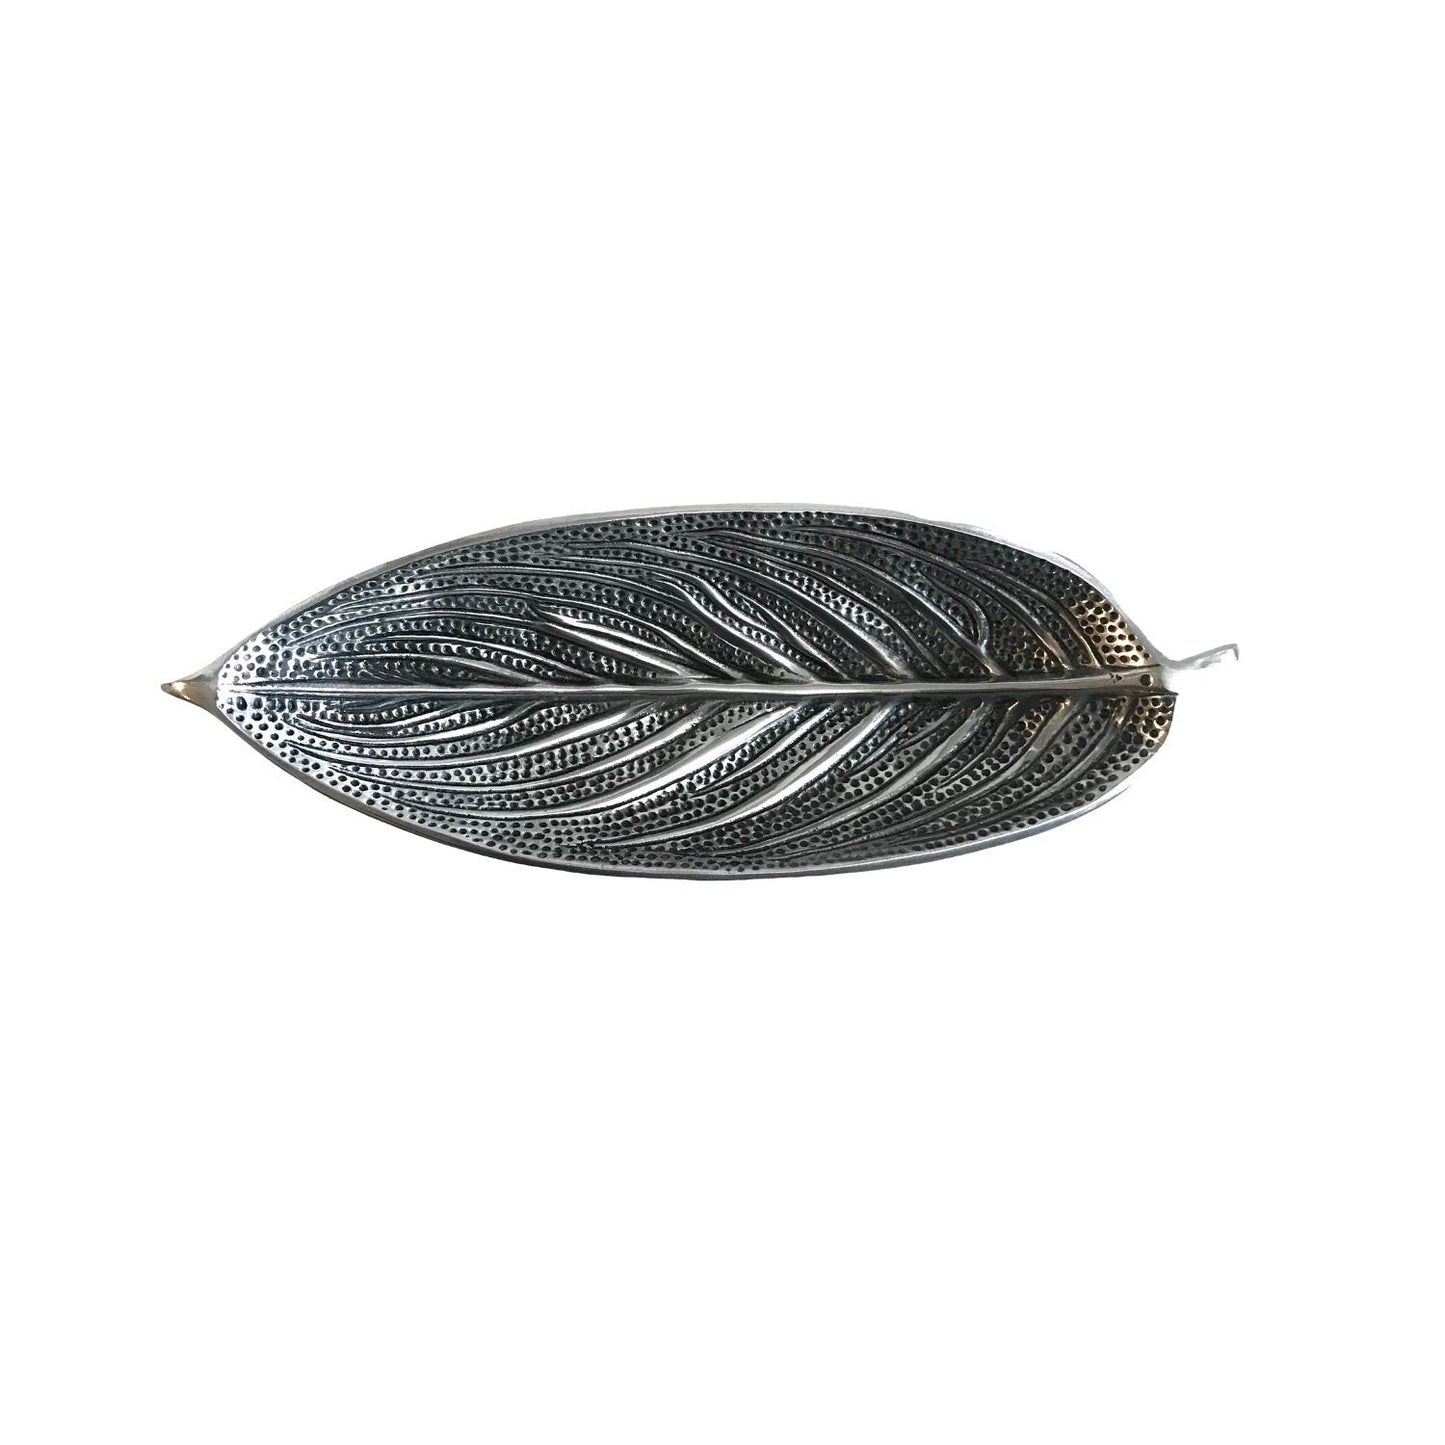 Recycled Metal Leaf Incense Holder Candles + Aroma Pretty Clean Shop Prettycleanshop